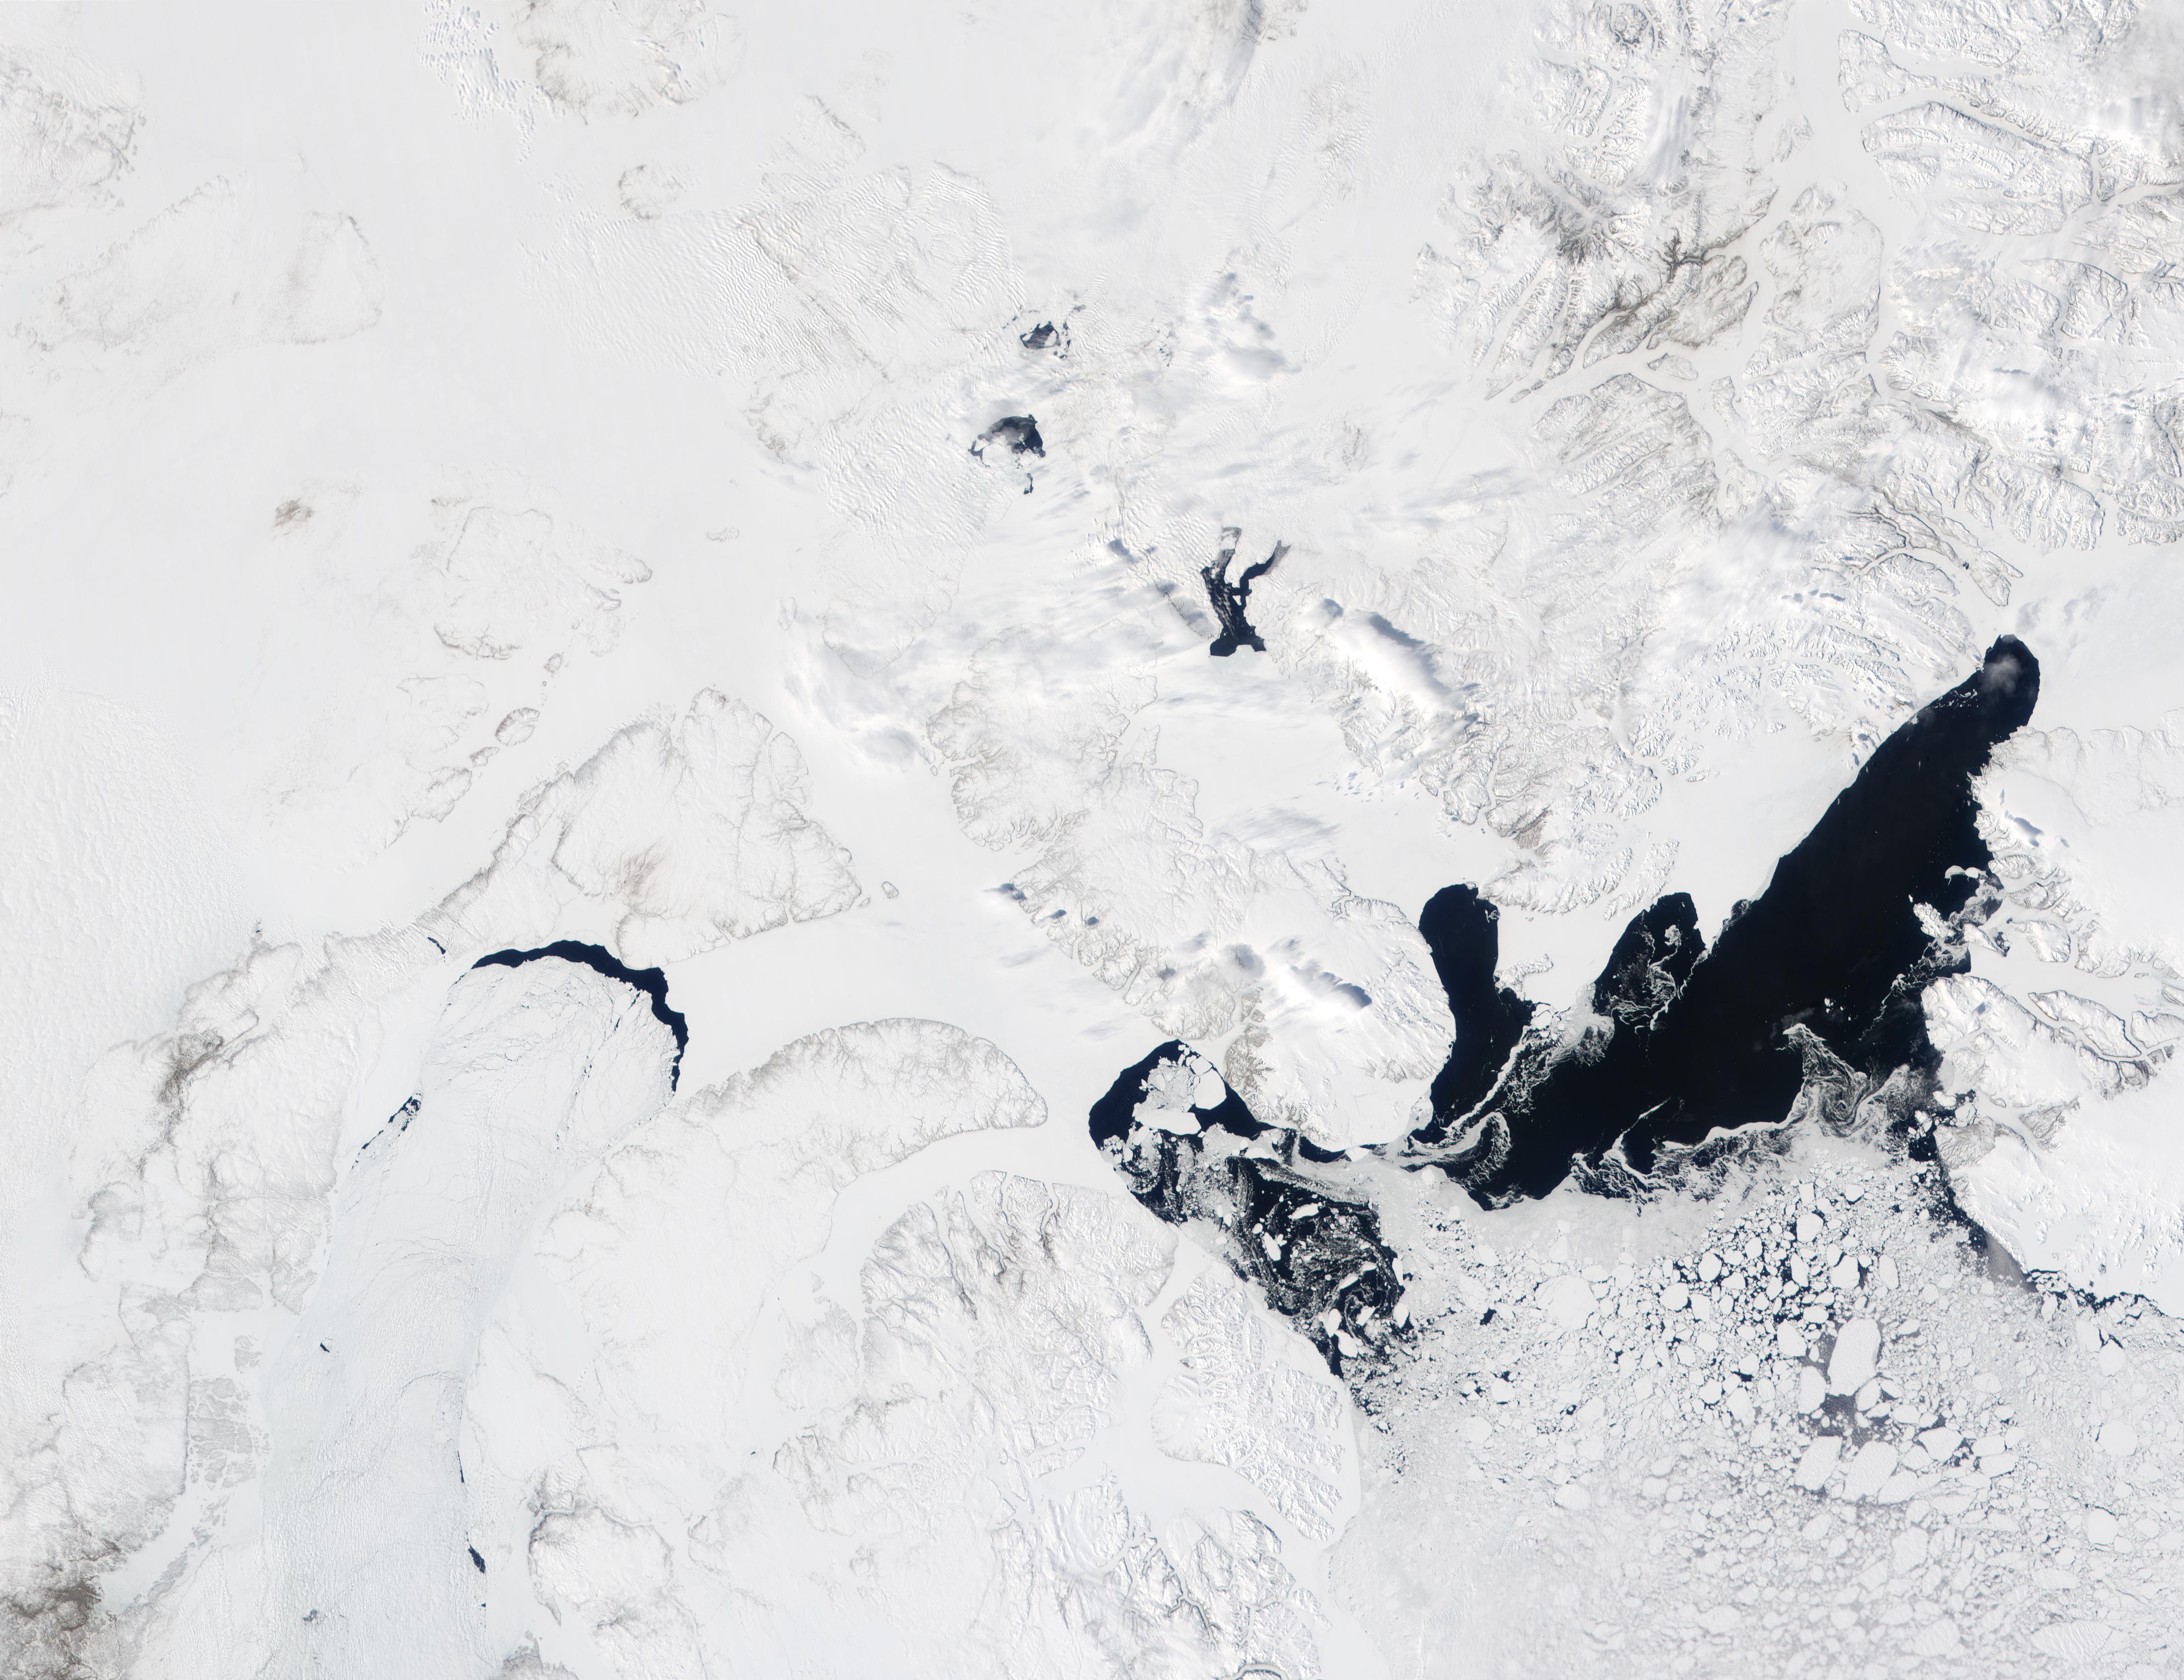 Northernmost Canada and Baffin Bay - related image preview